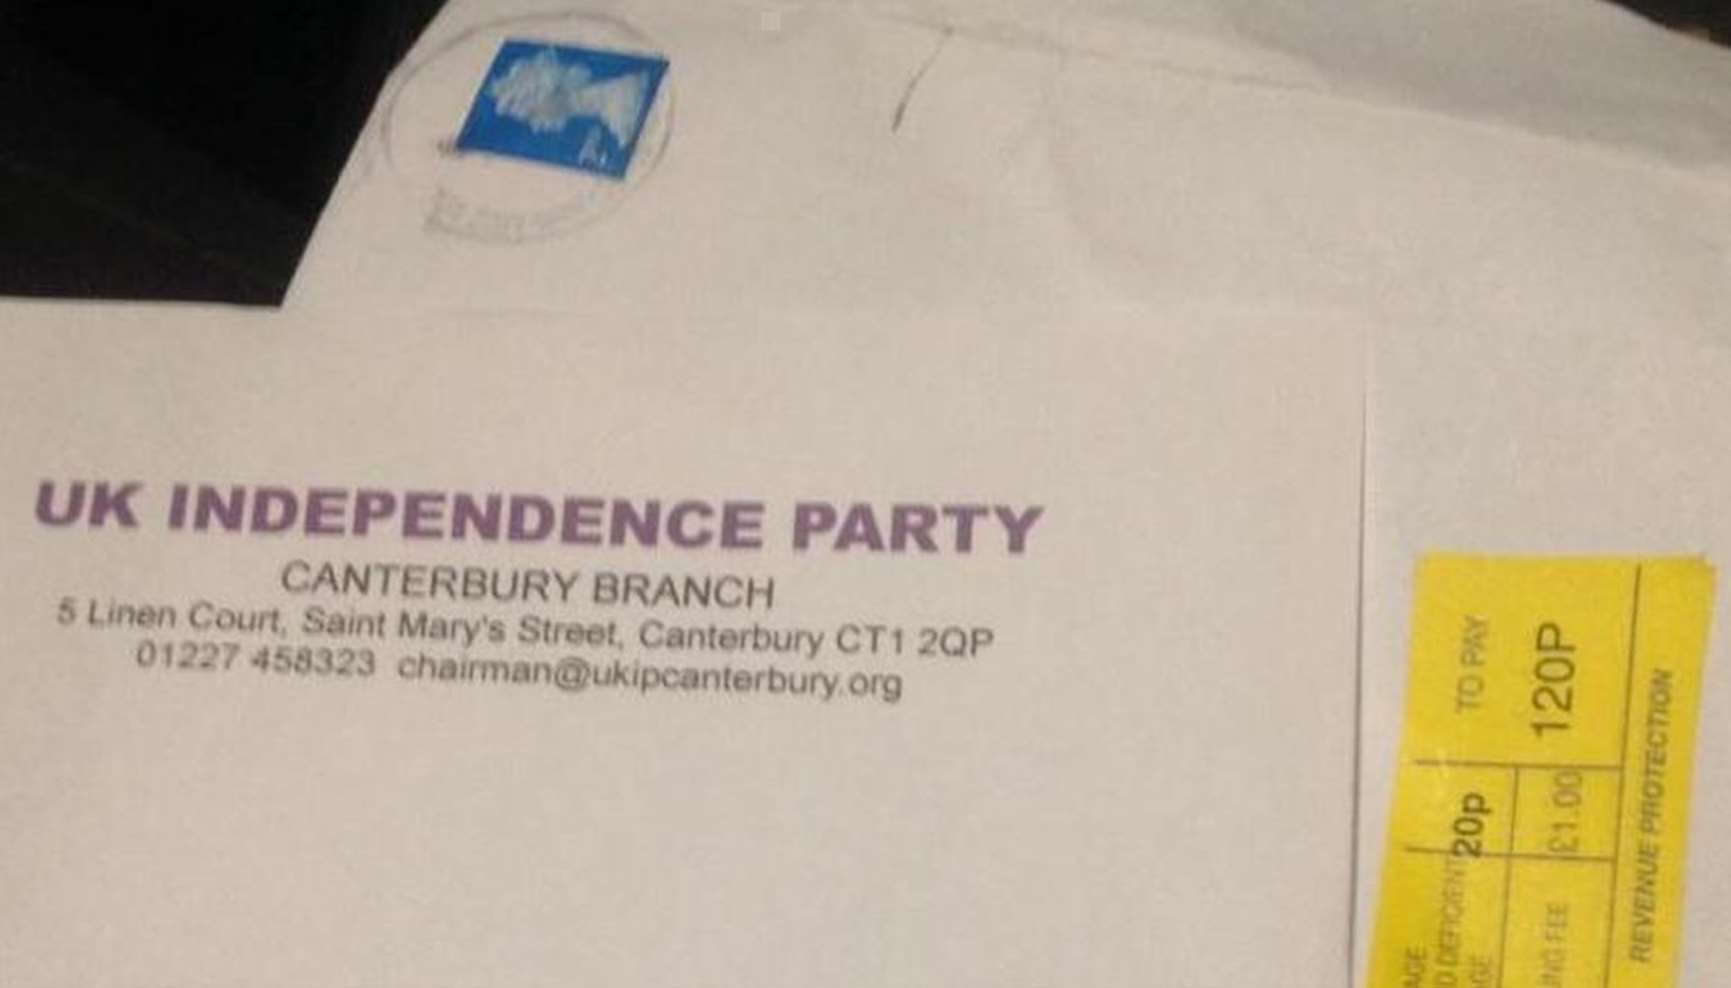 Tories were required to pay £1.20 for a letter from Ukip